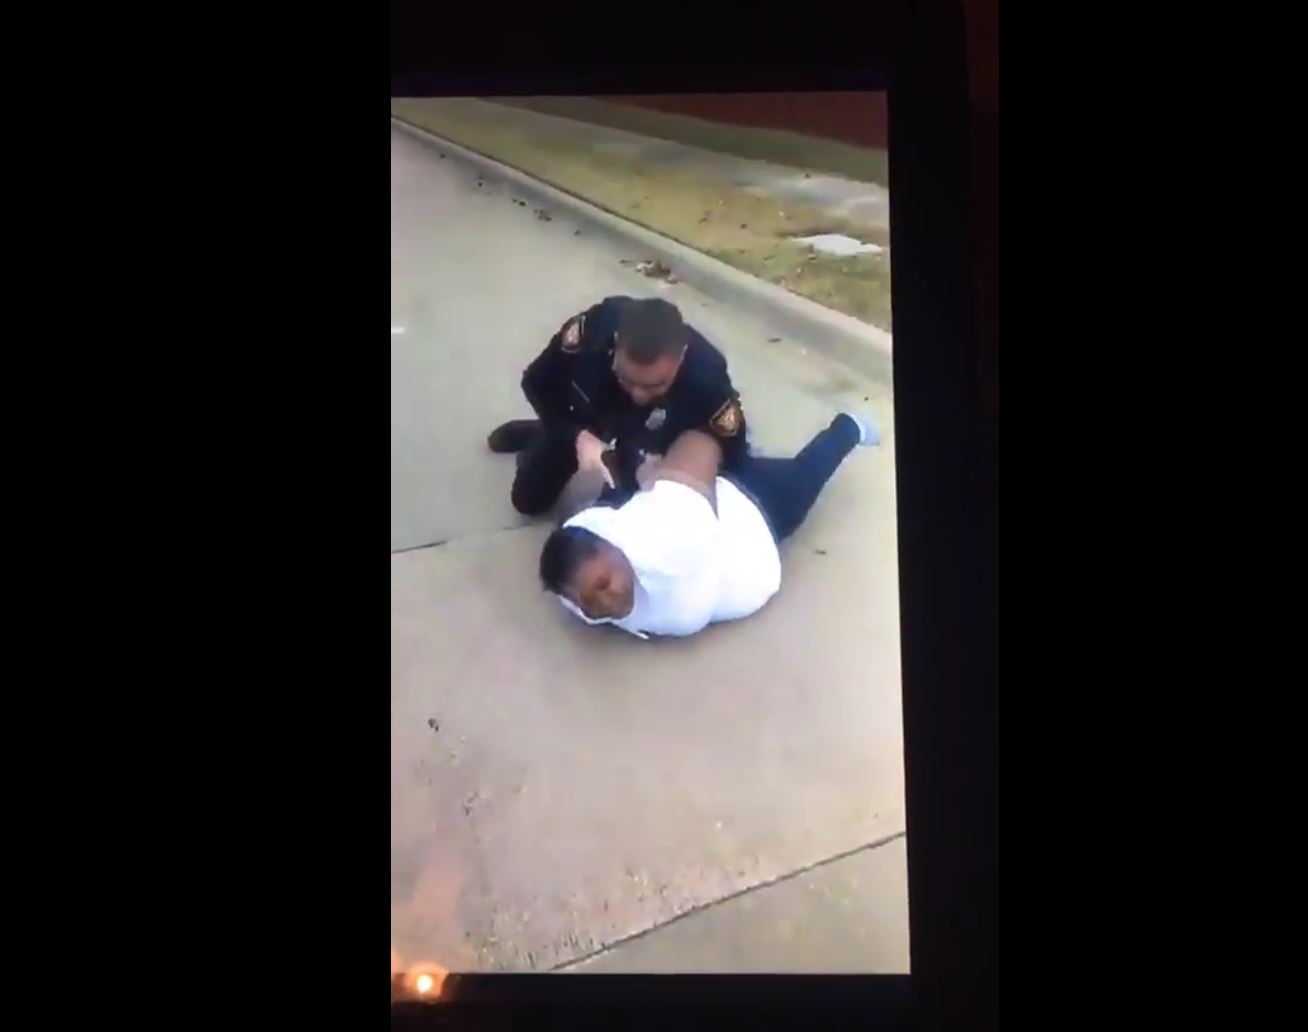 An identified Fort Worth police officer holds Jacqueline Craig on the ground. This image comes from a Facebook Live video that has since gone viral.